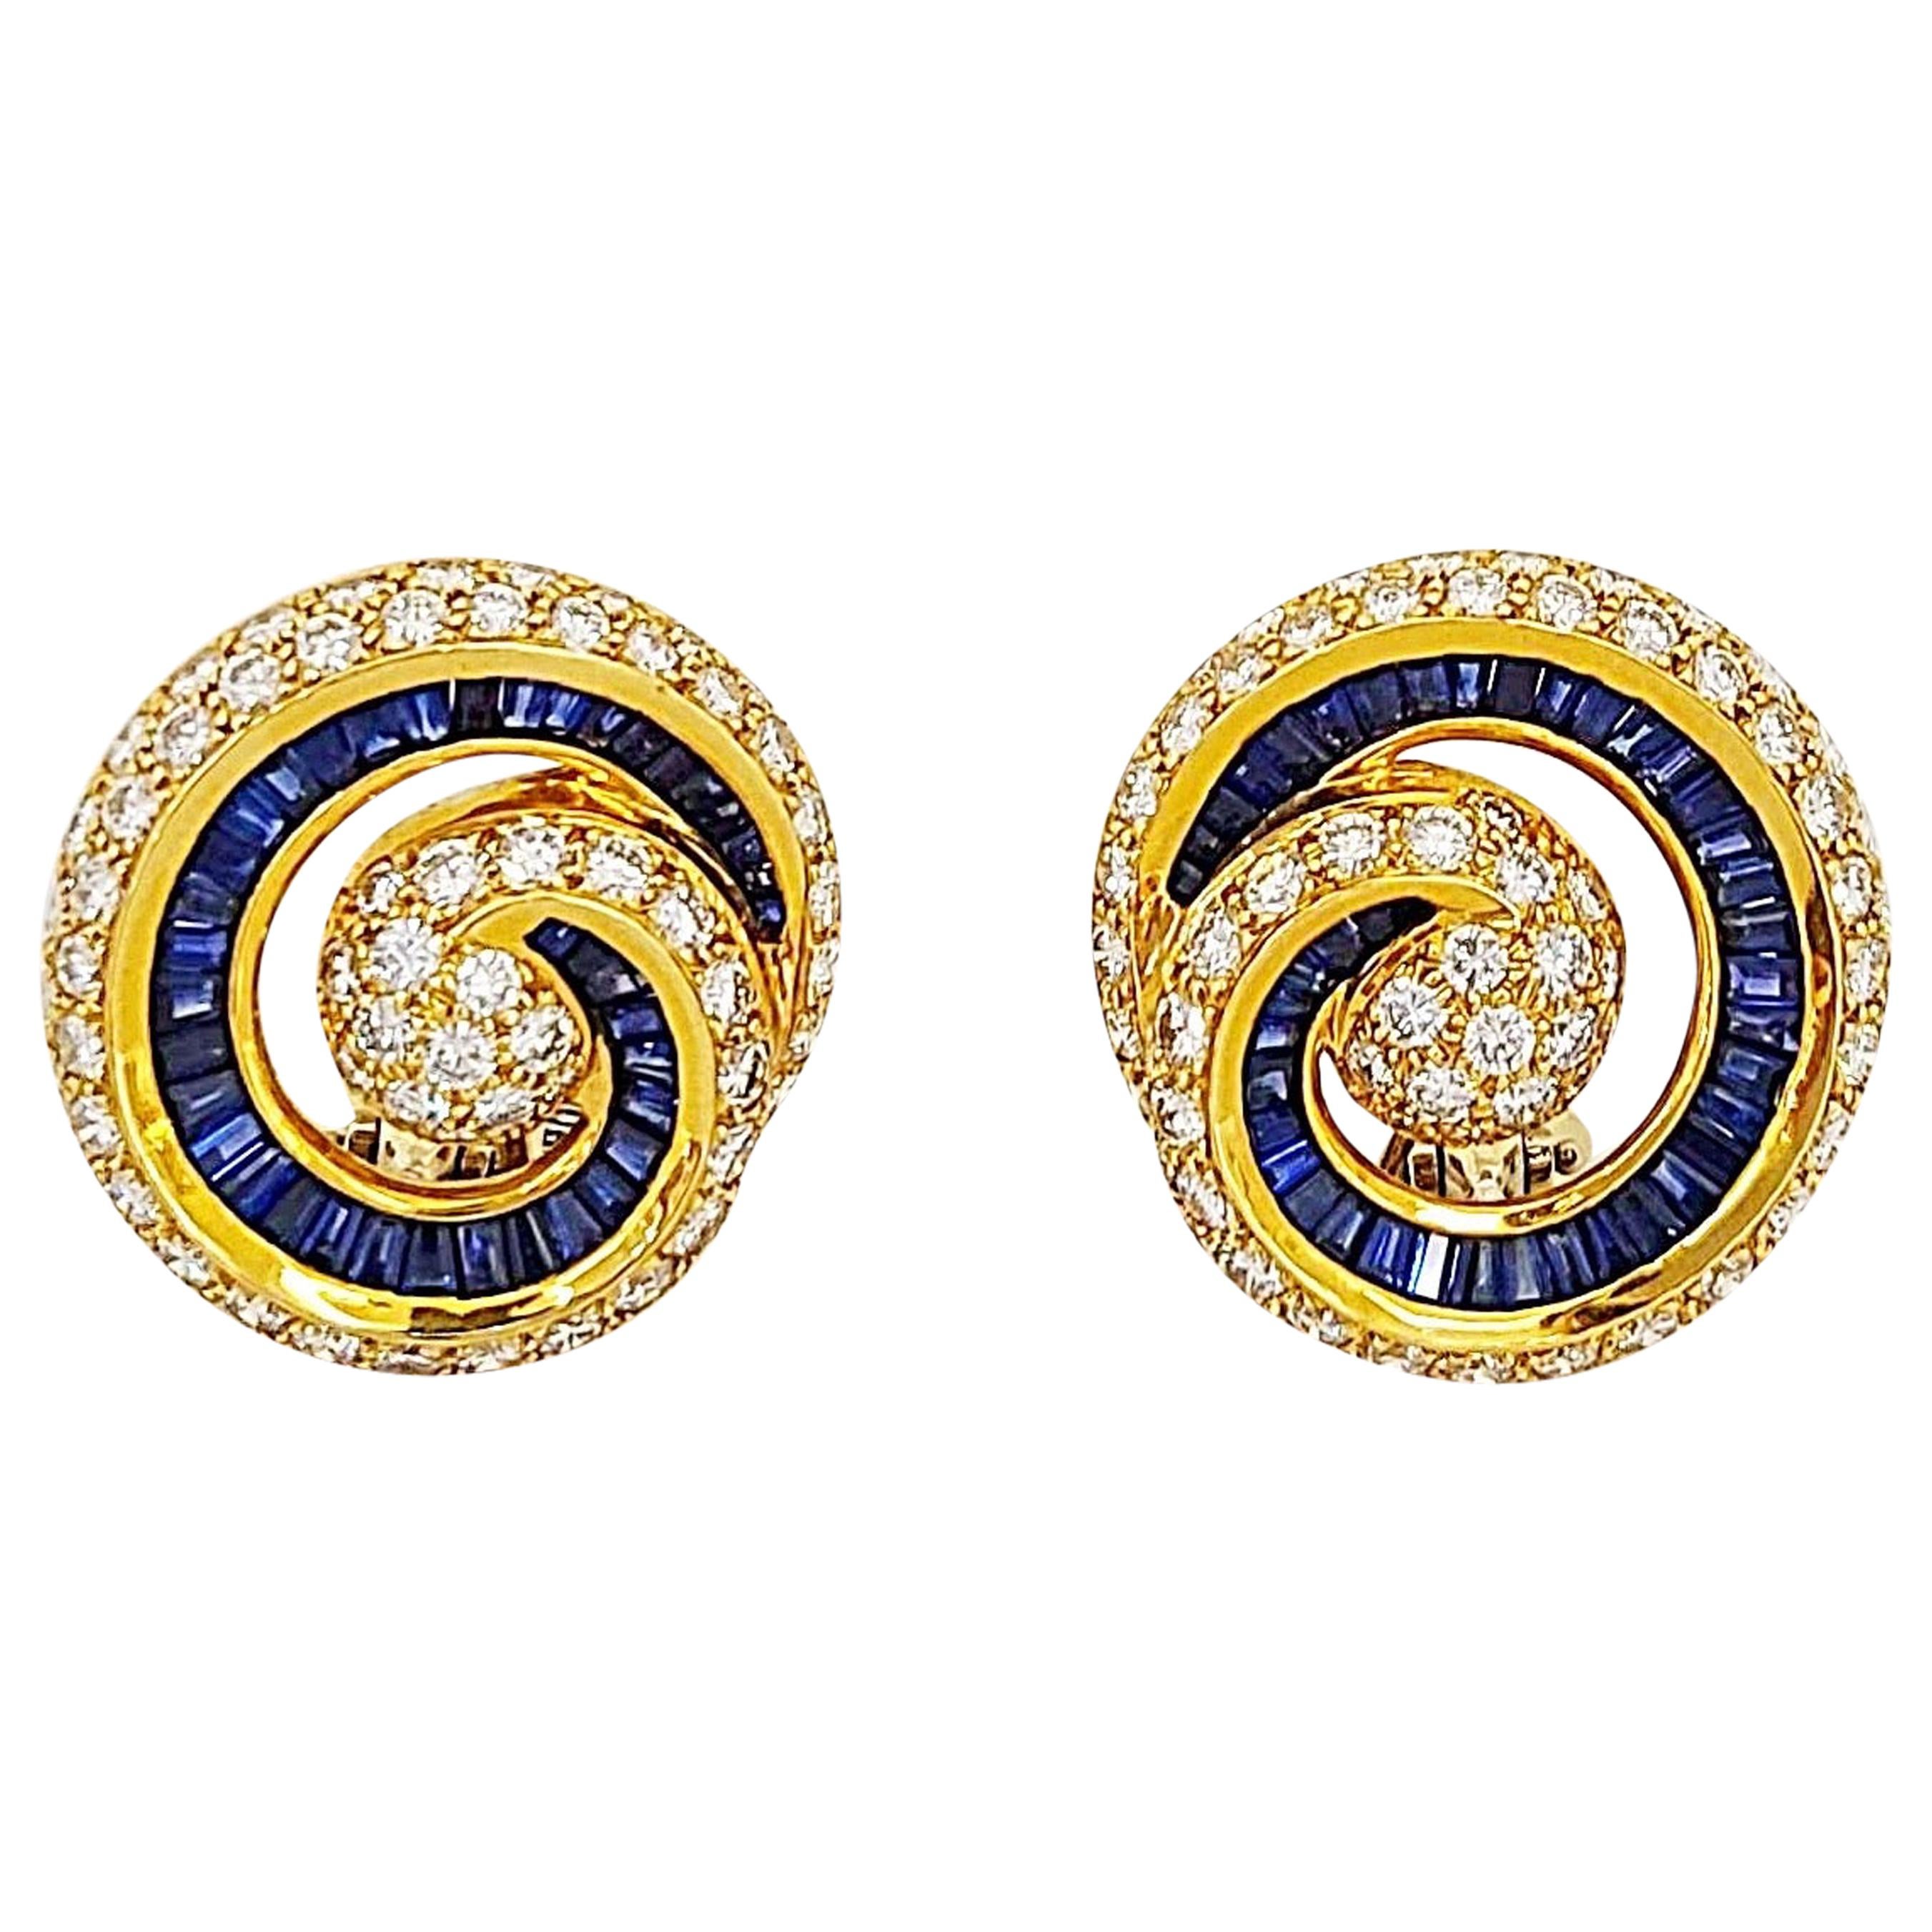 Charles Krypell 18 Karat Yellow Gold Diamond and Blue Sapphire Nautilus Earrings For Sale